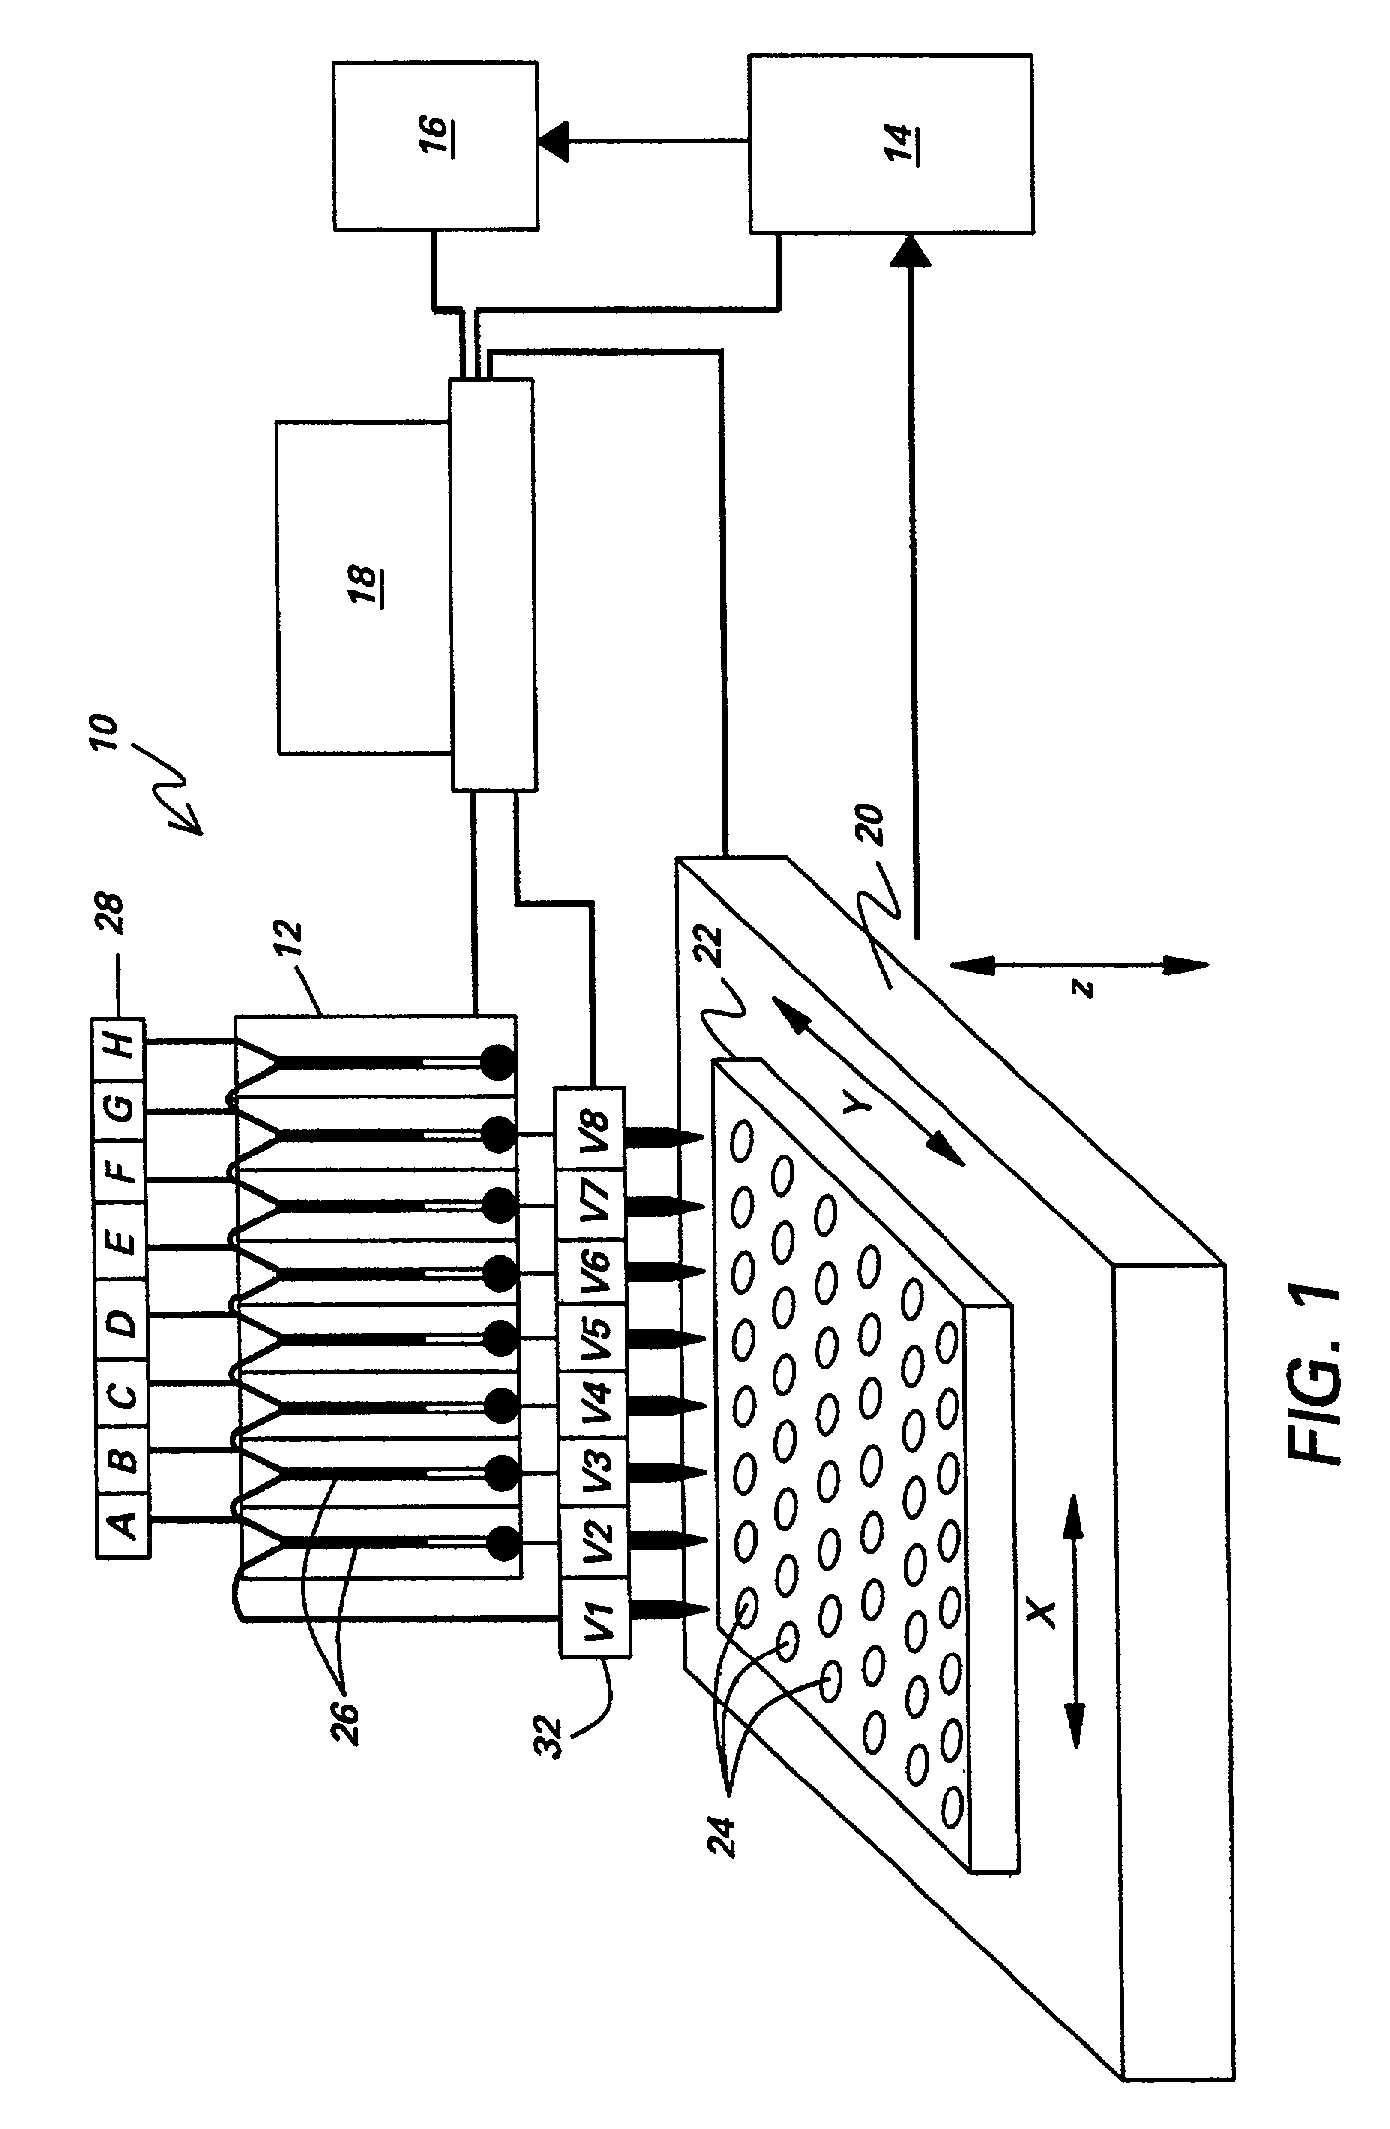 Method and system to conduct a combinatorial high throughput screening experiment